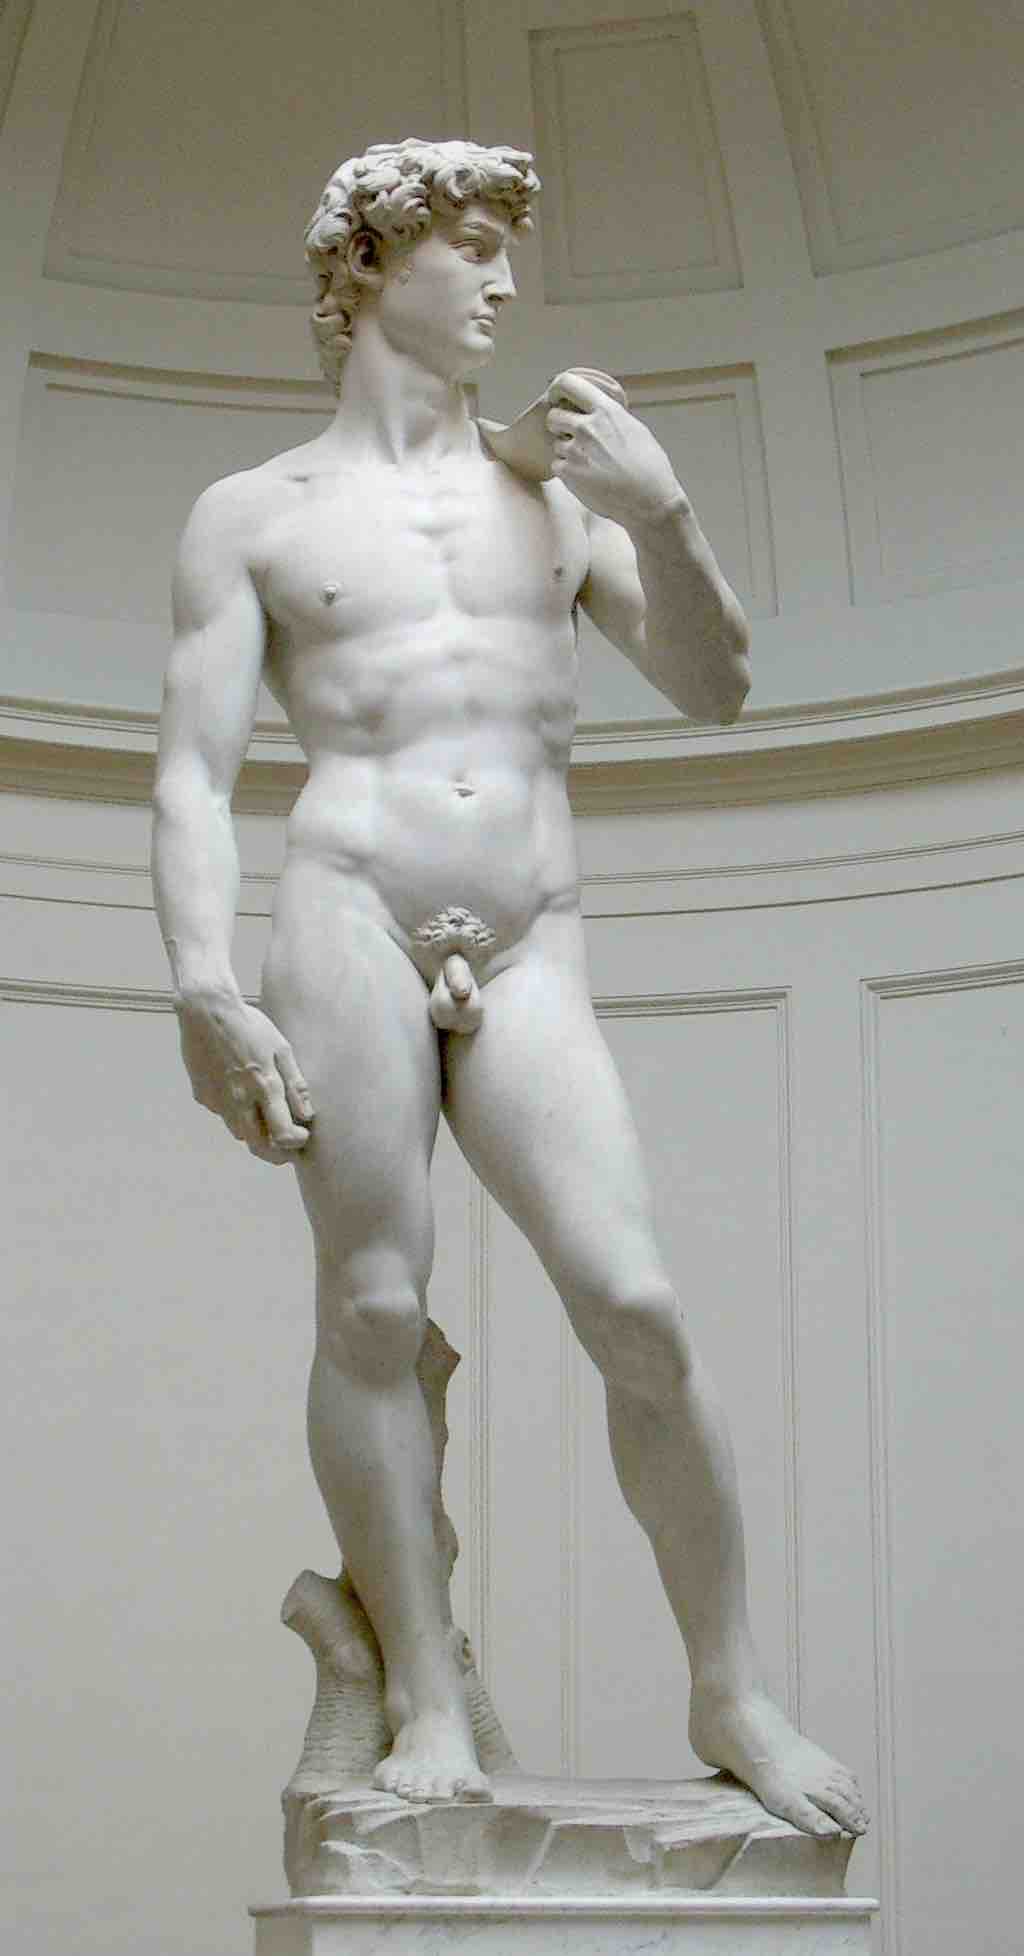 The David by Michelangelo, 1504